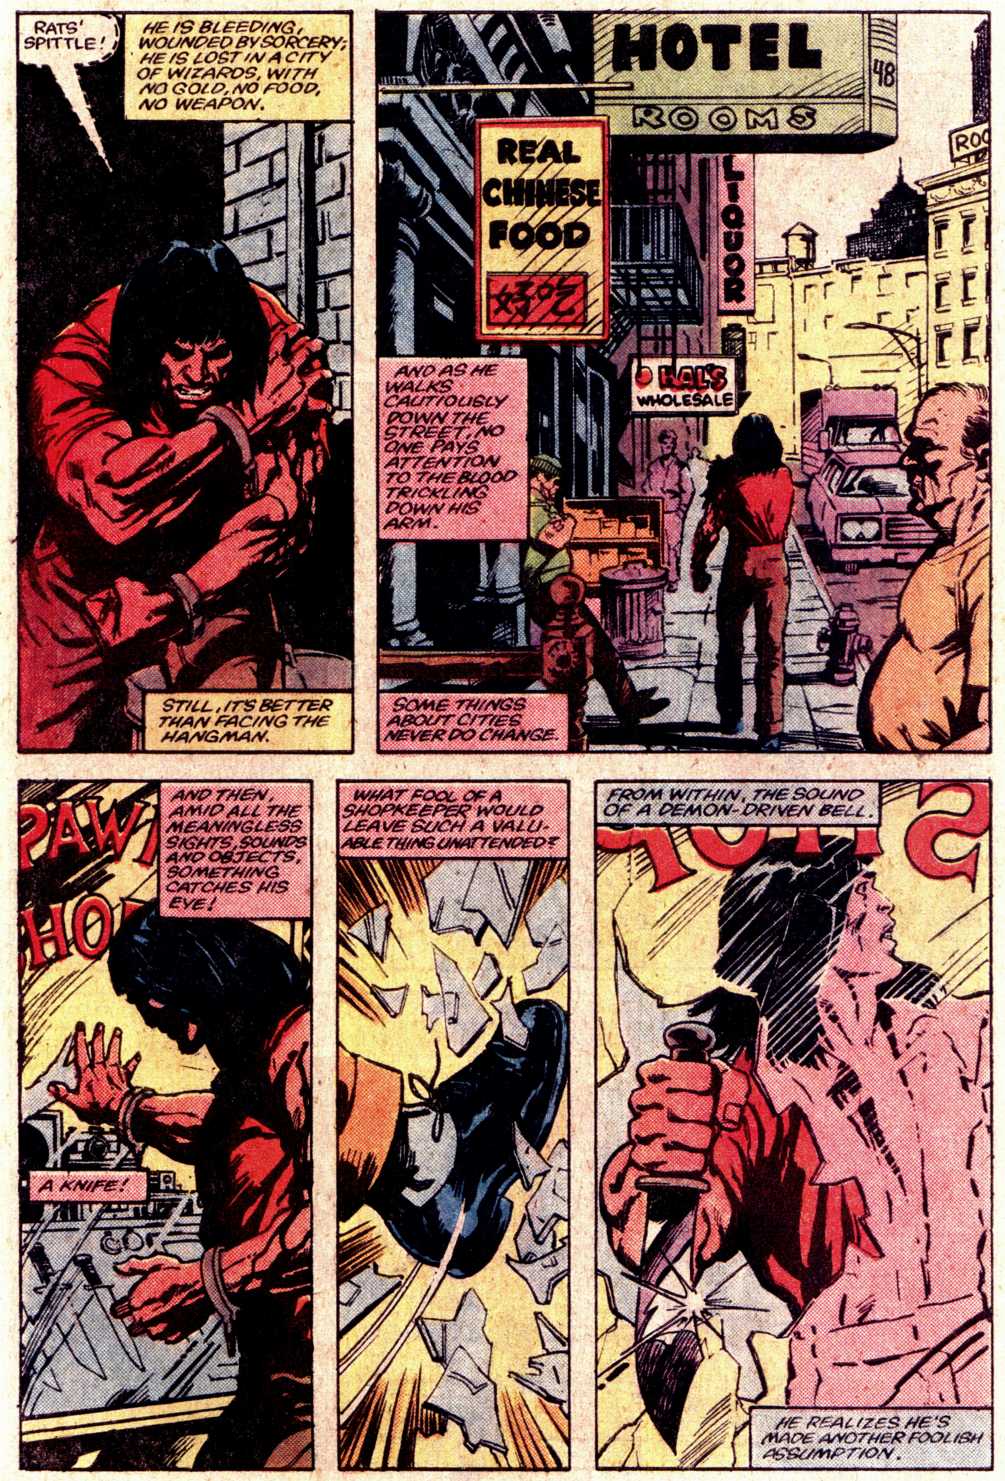 What If? (1977) issue 43 - Conan the Barbarian were stranded in the 20th century - Page 7